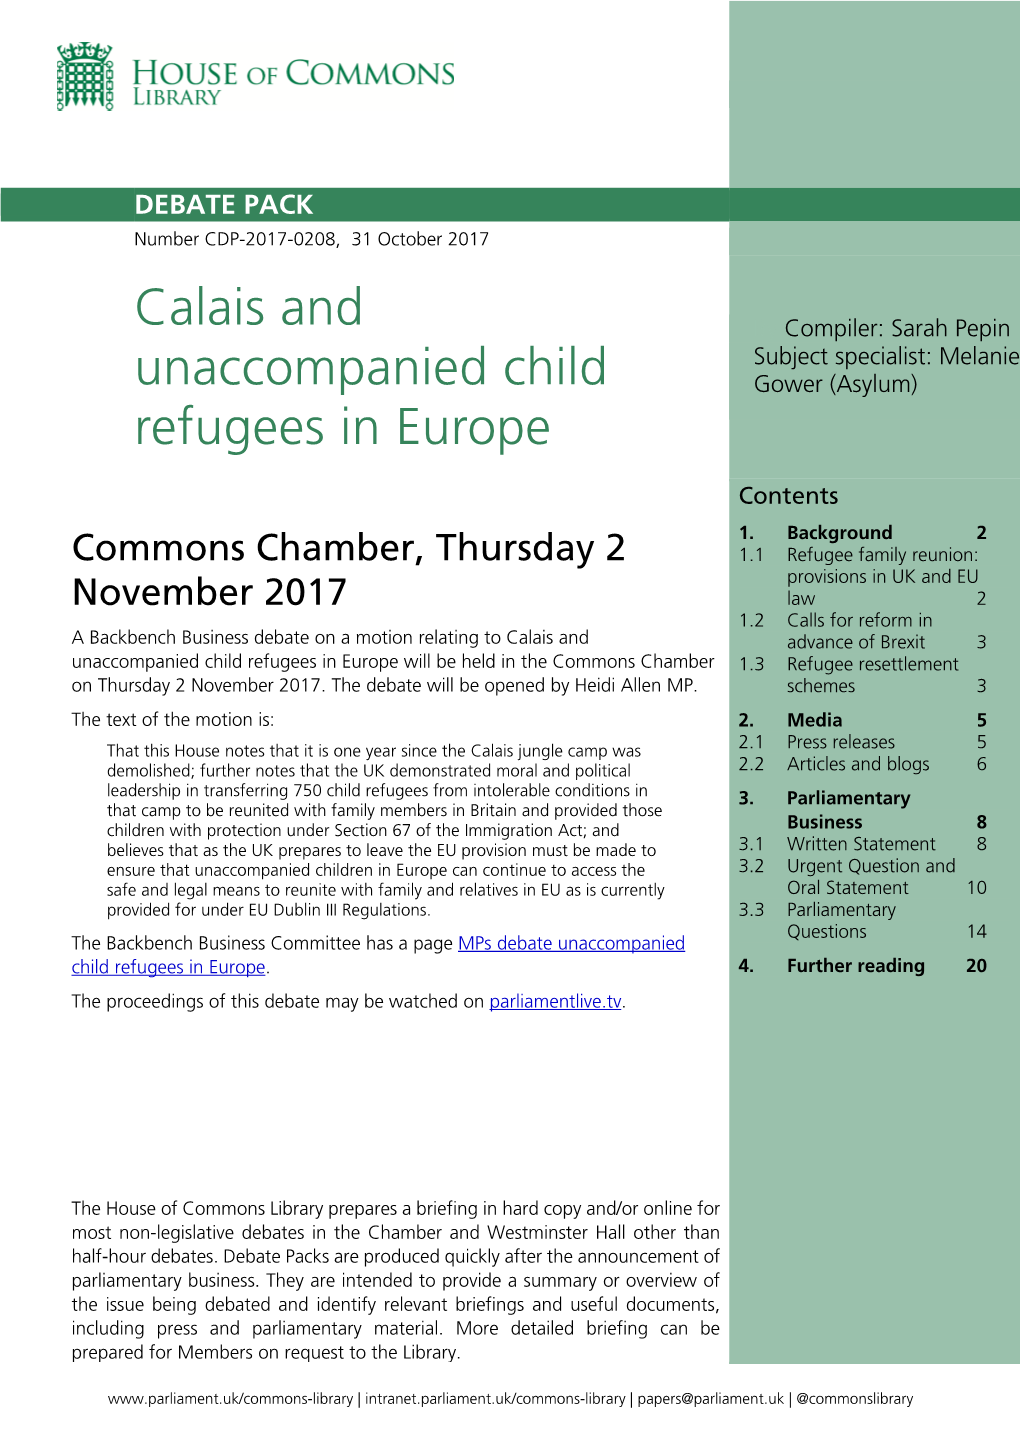 Calais and Unaccompanied Child Refugees in Europe 3